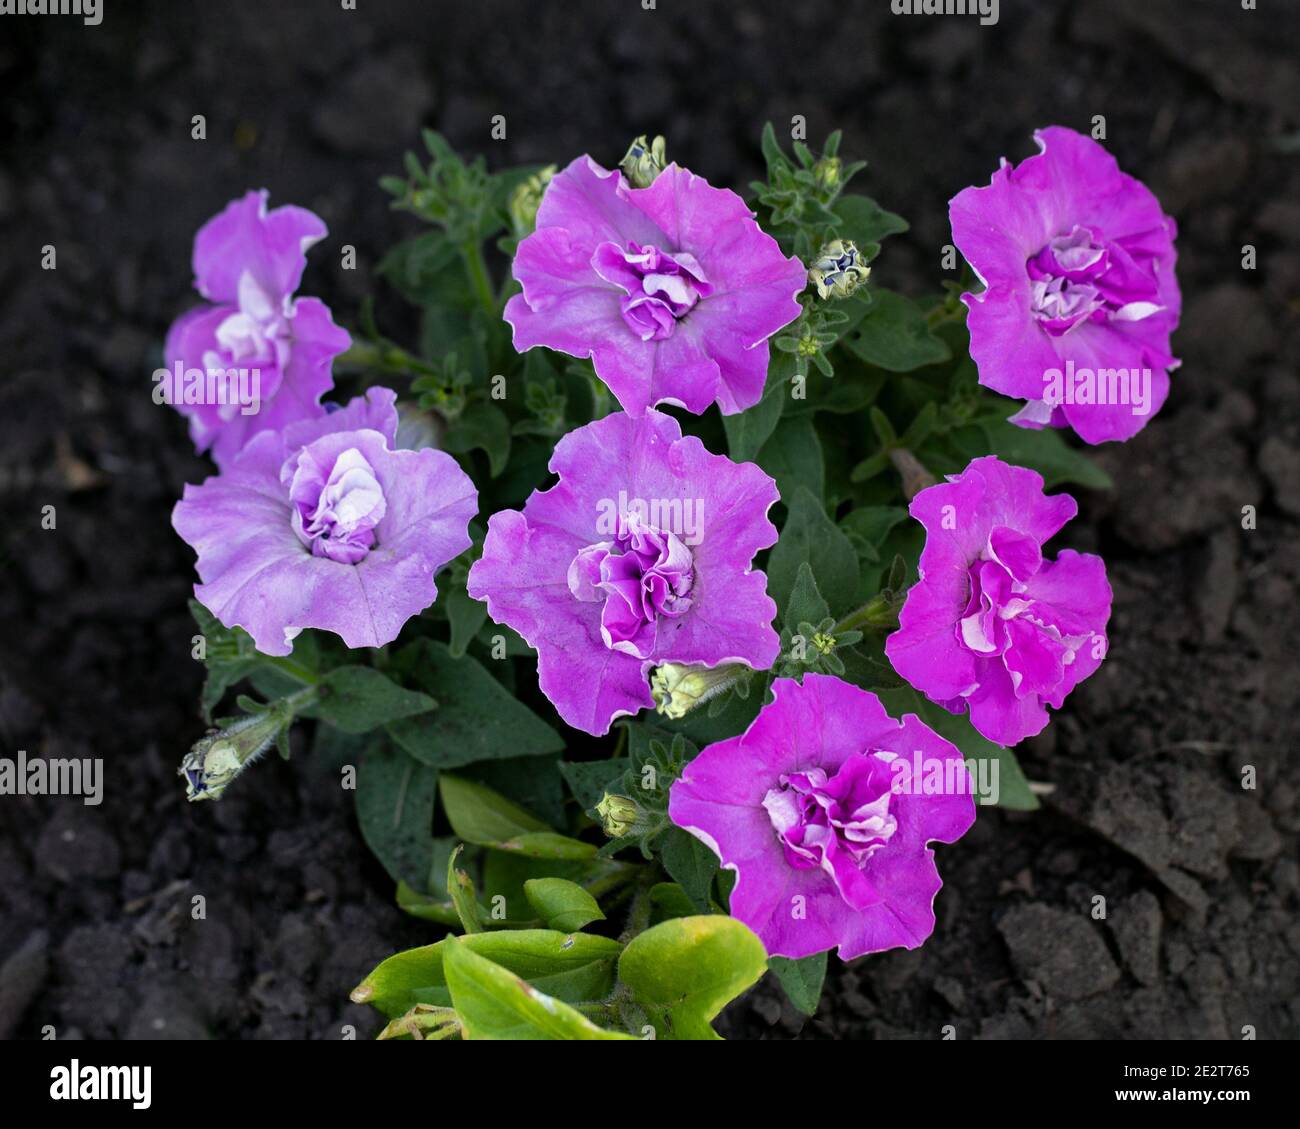 Flowerbed with multiflora petunia flowers with blooming pink petals Stock Photo